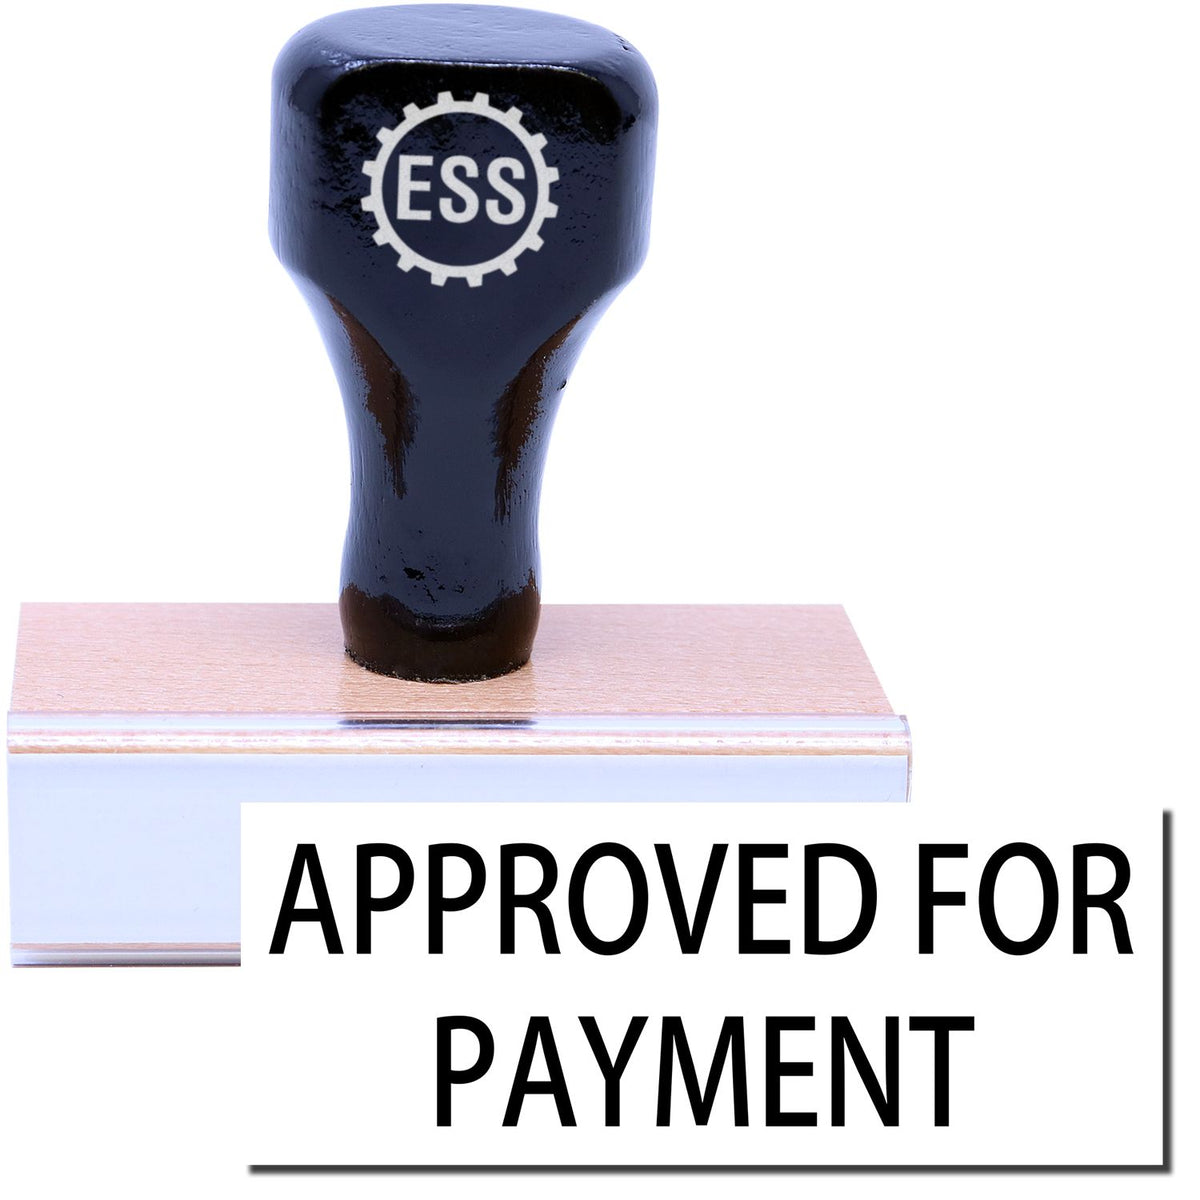 A stock office rubber stamp with a stamped image showing how the text &quot;APPROVED FOR PAYMENT&quot; is displayed after stamping.